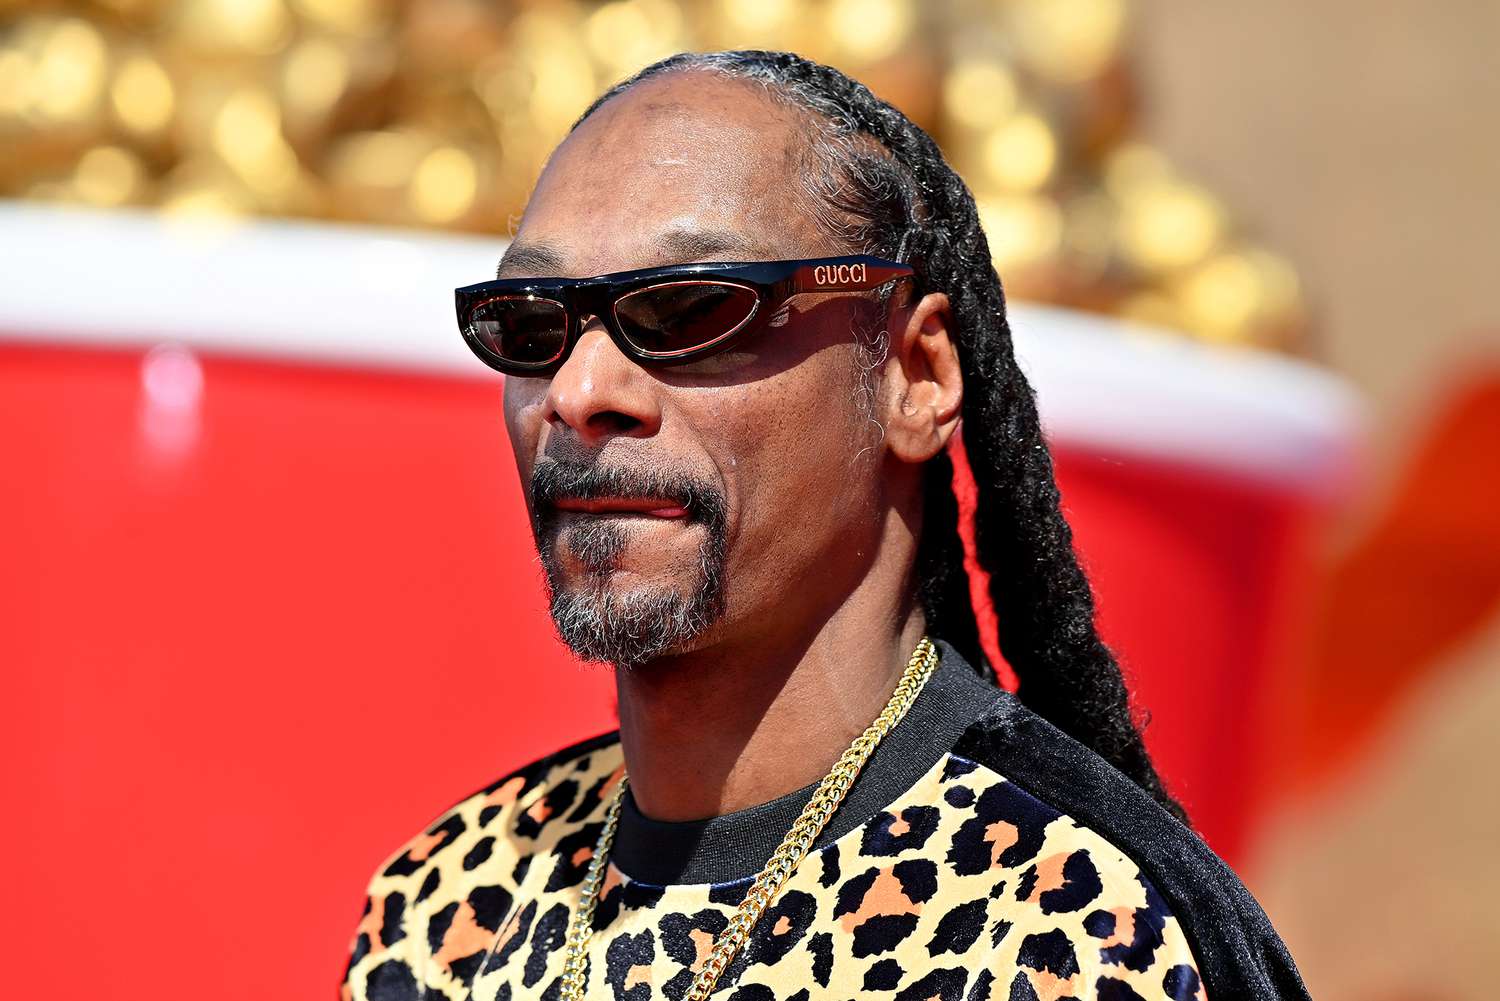 Snoop Dogg Net Worth - How Much Wealth Does Snoopy Have?